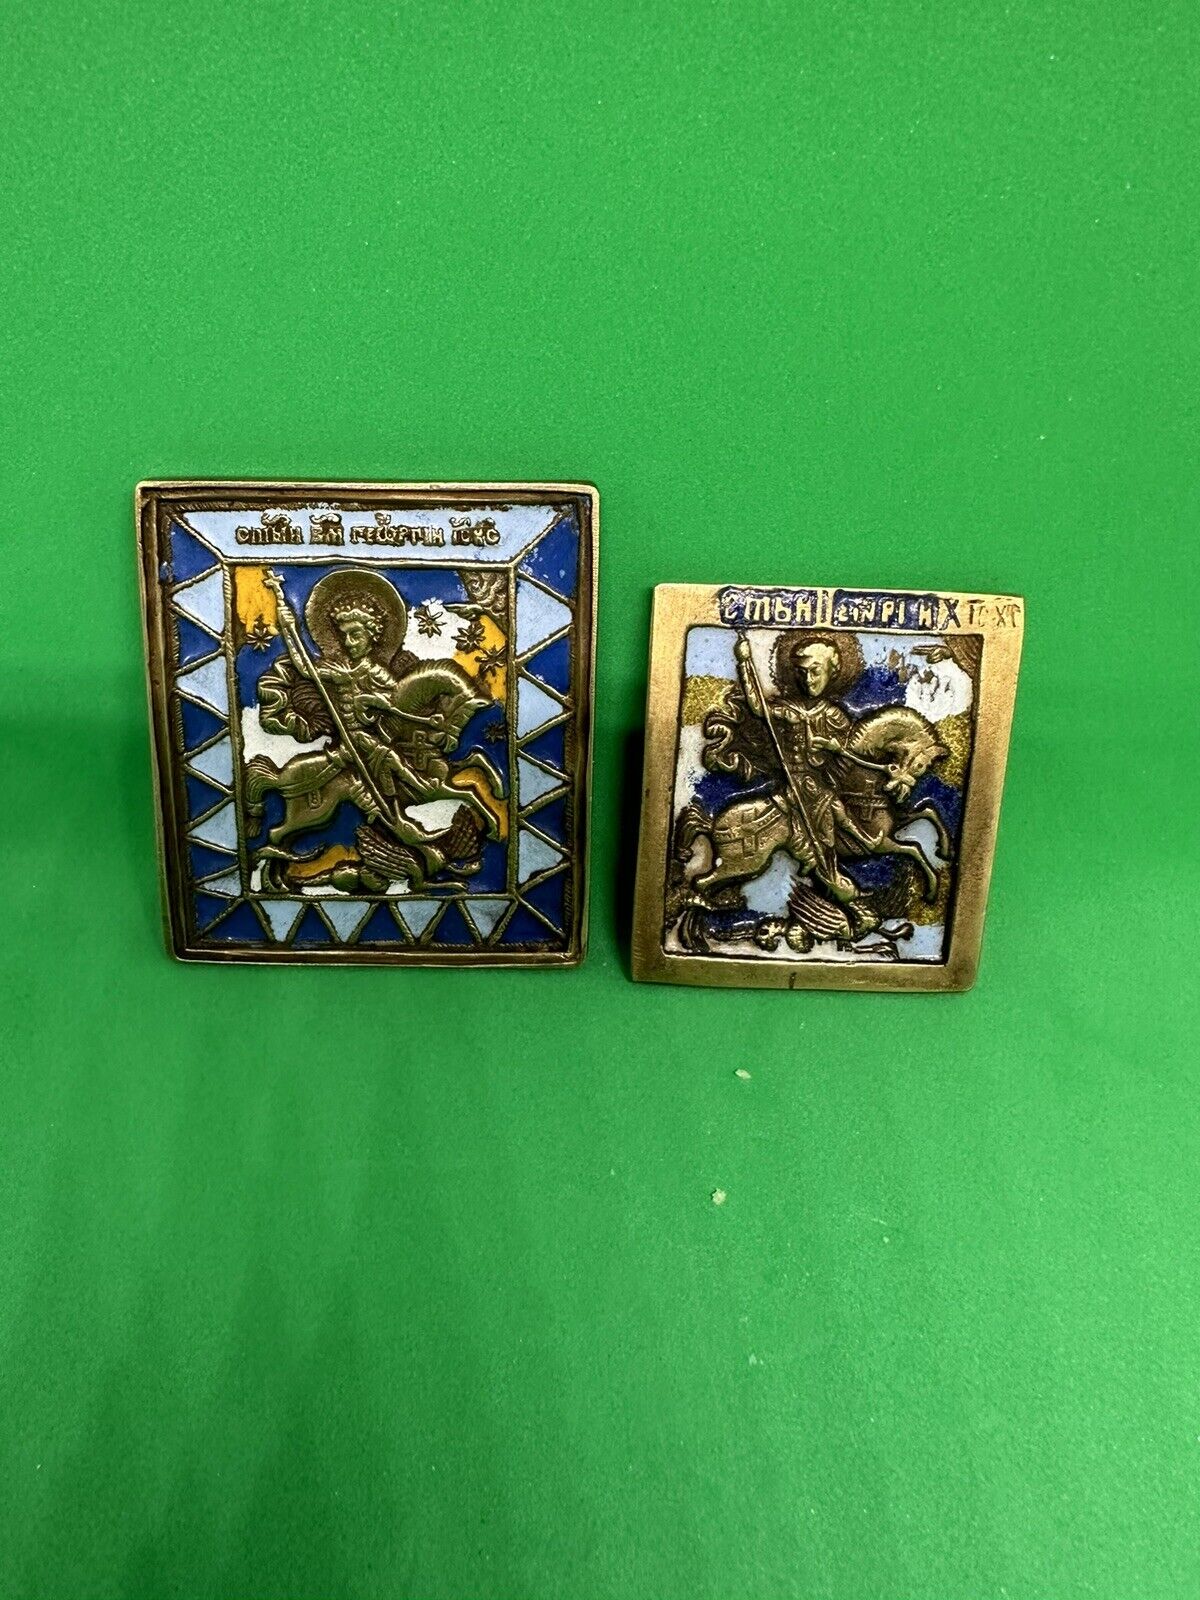 Two 19th century Orthodox Bronze enameled ICONS  of  Saint George the Victorious